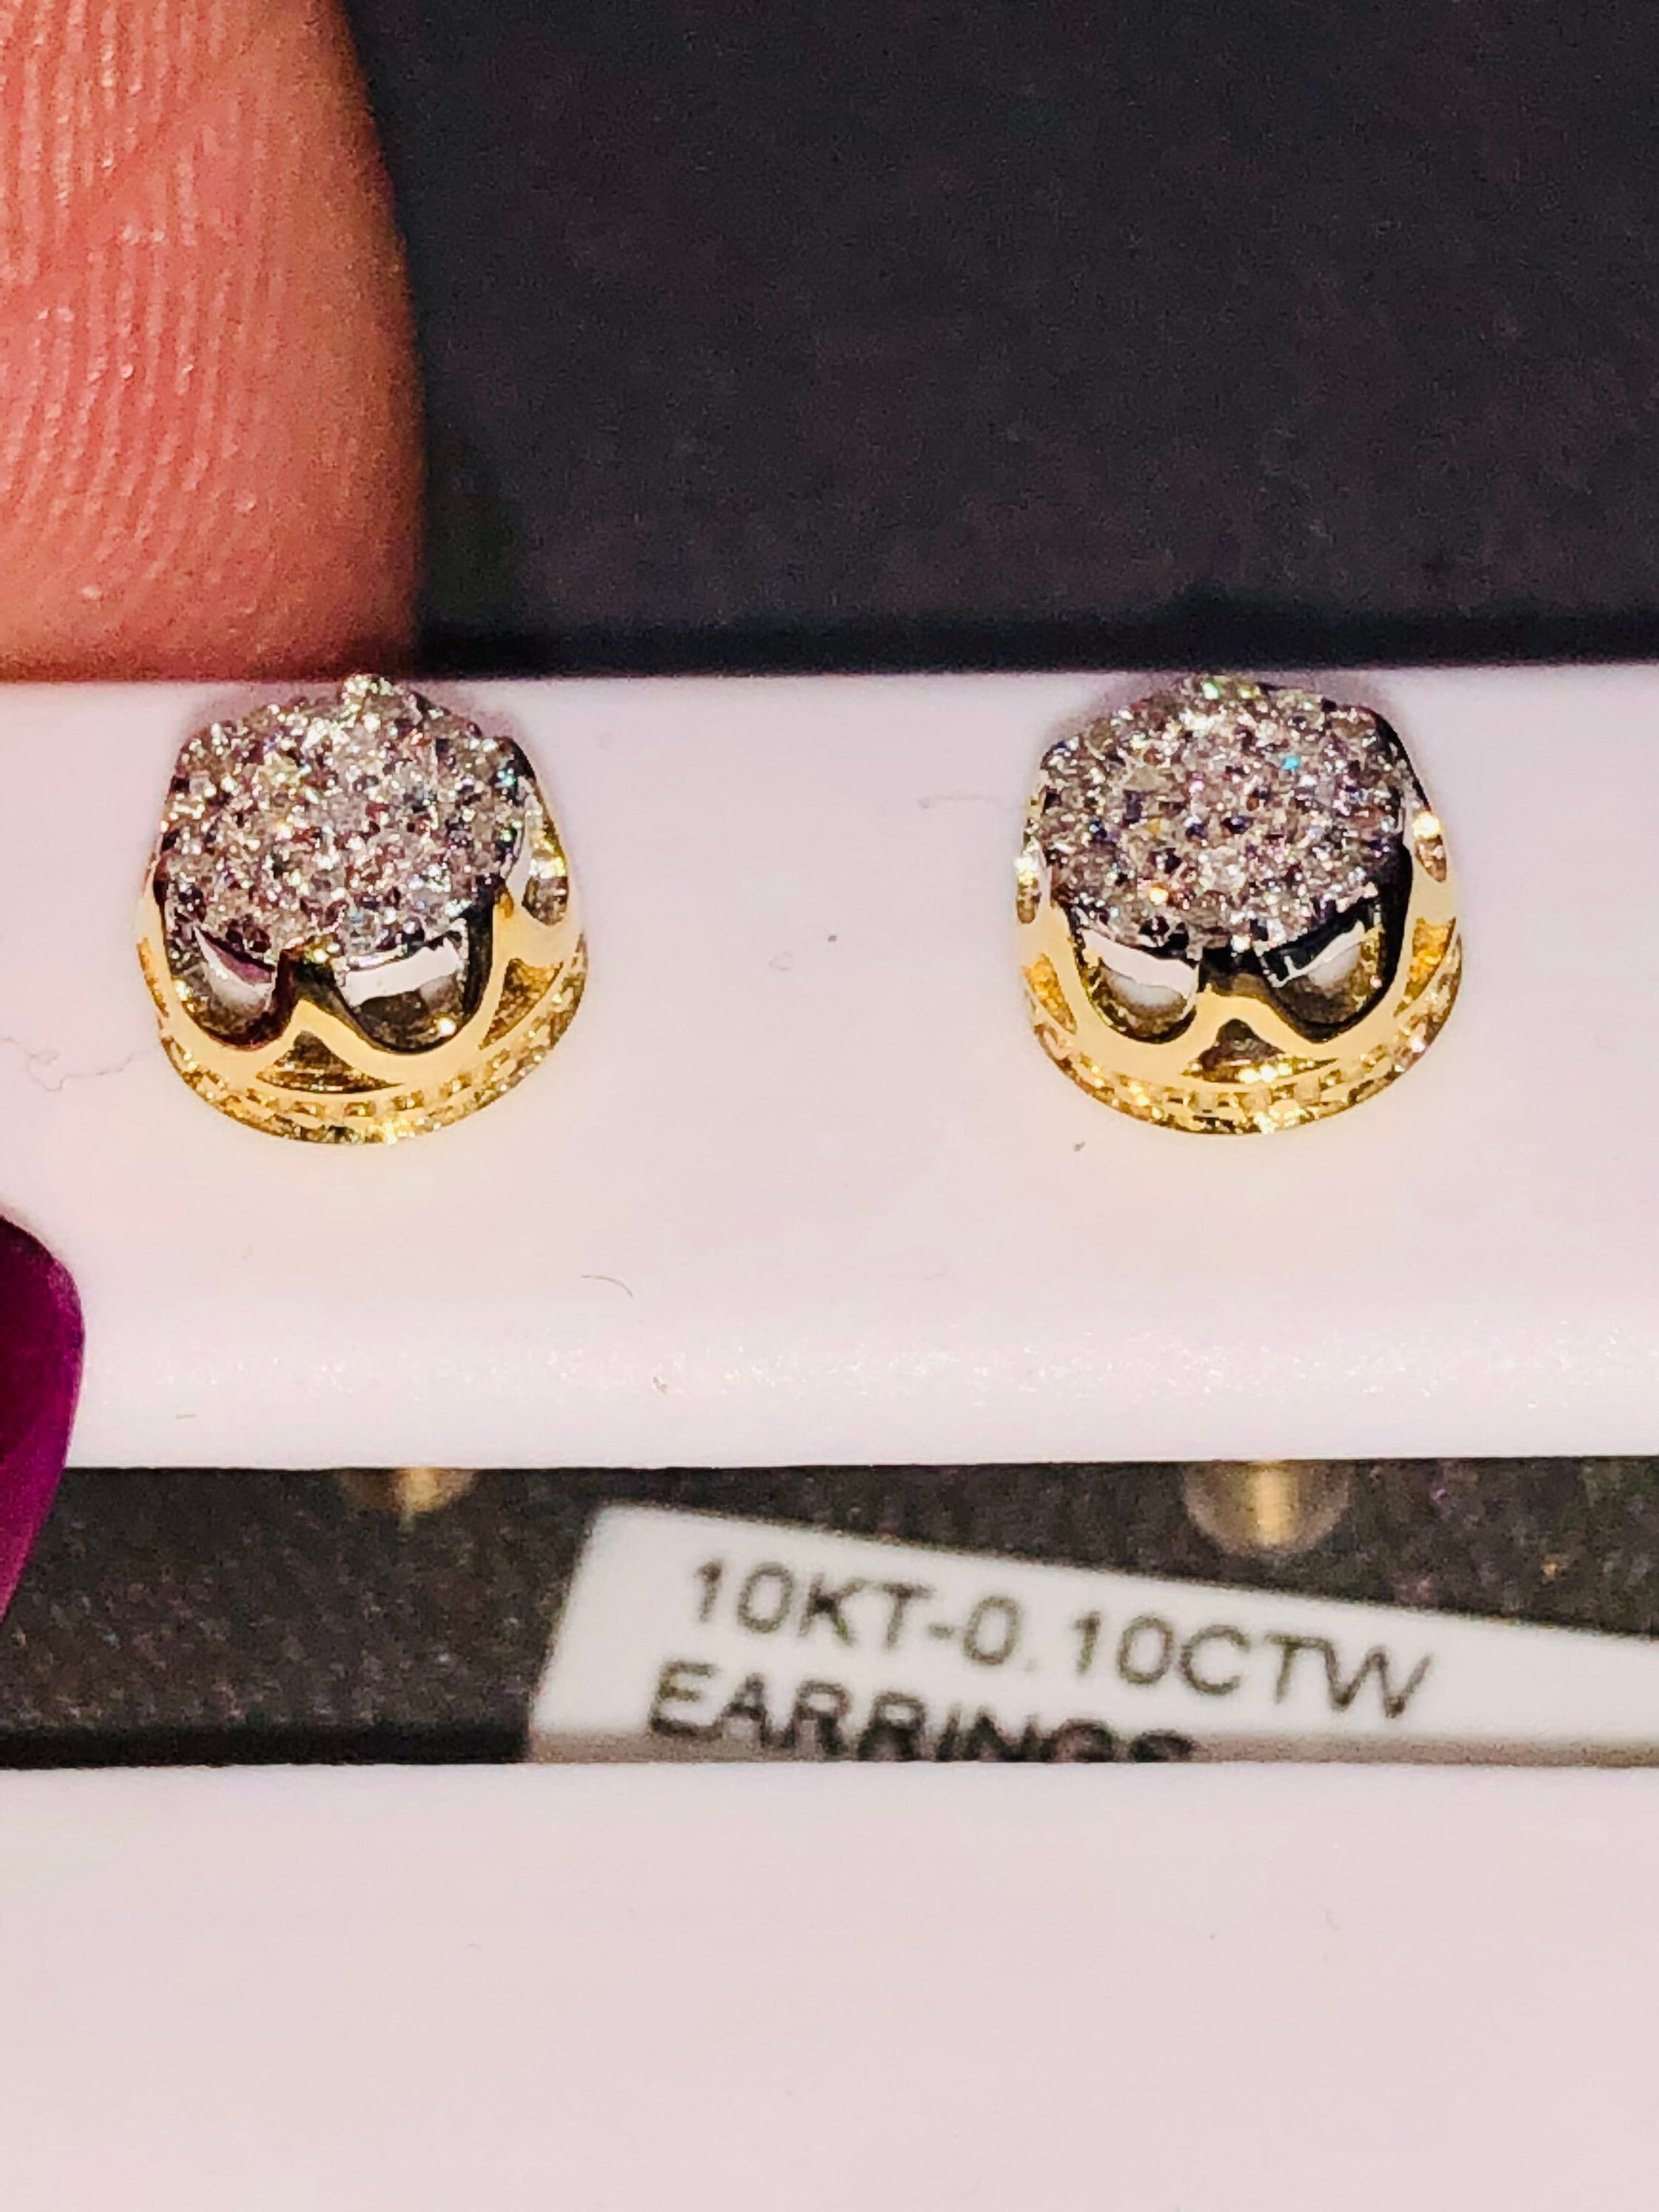 10k solid real gold Royal collection real genuine natural diamond earring beautifully designed on a crown best gift Free Appraisal Wow! Sale